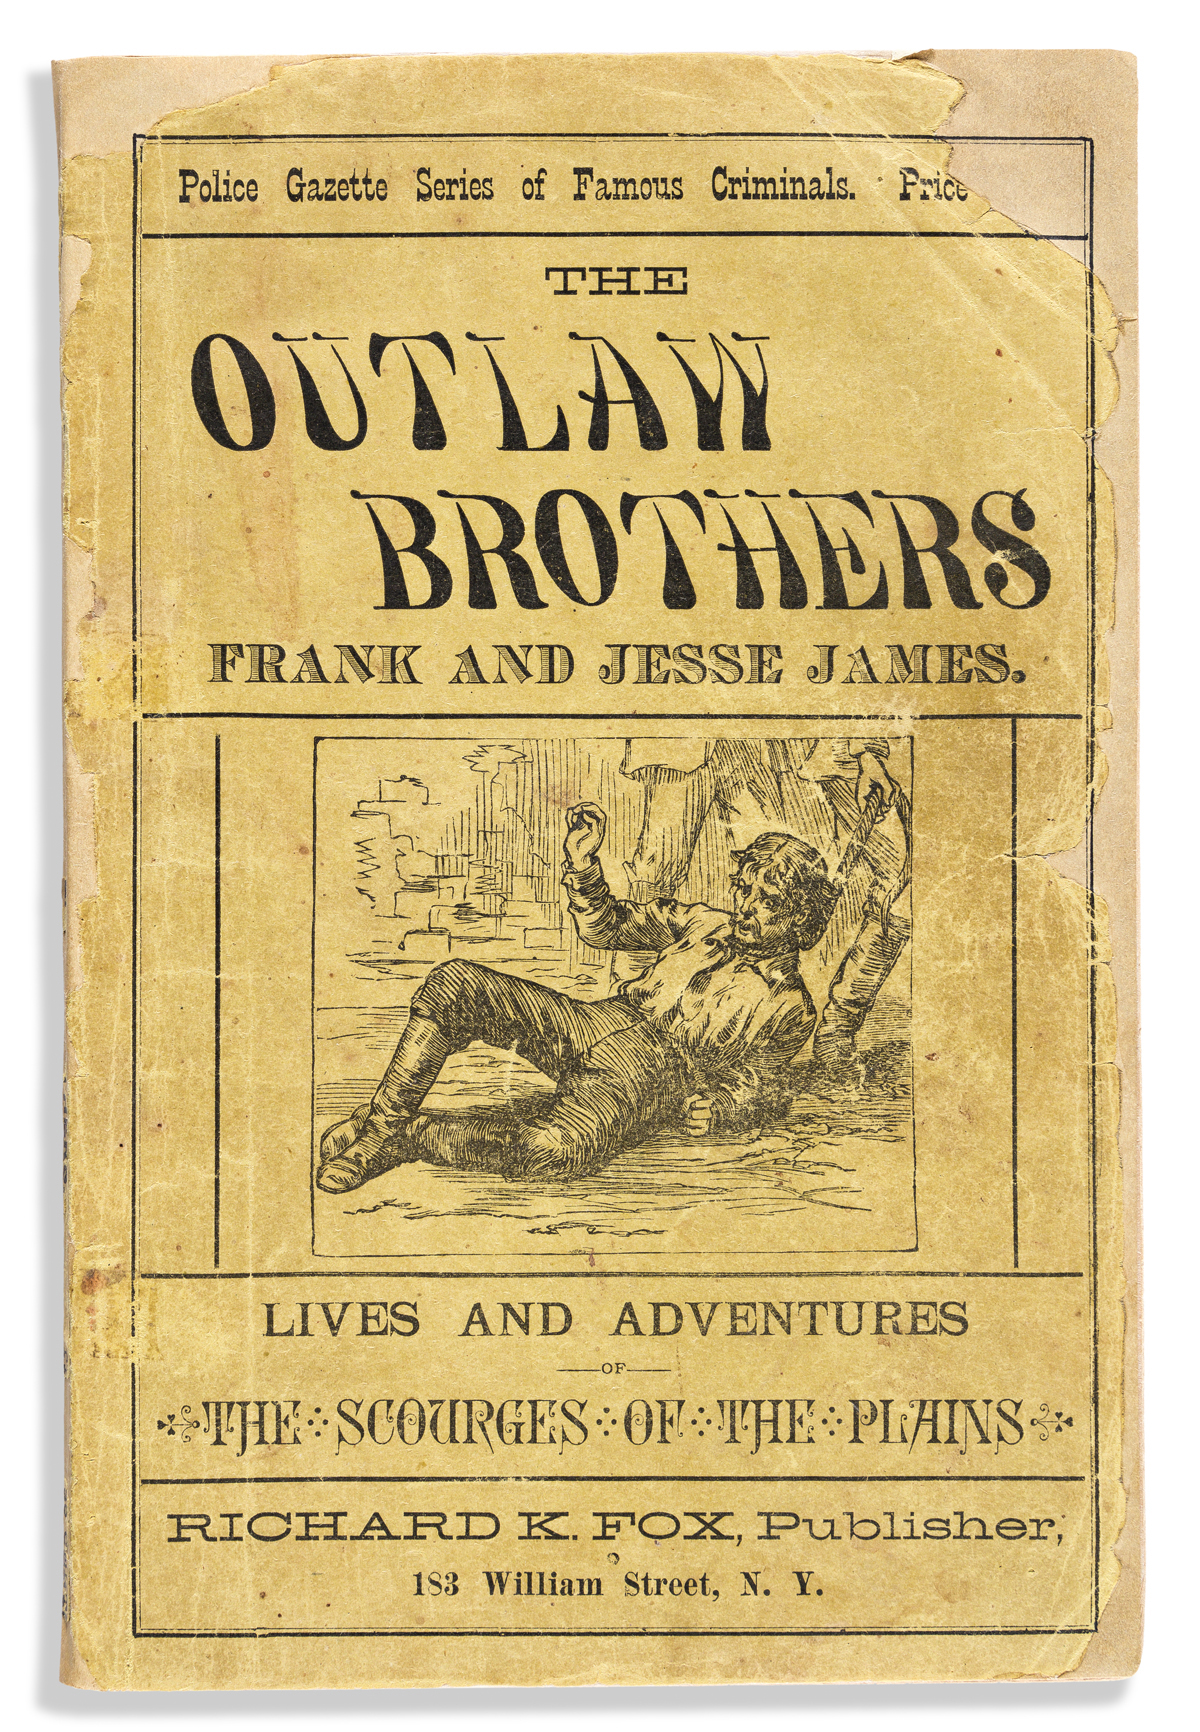 (CRIME.) [Thomas F. Daggett.] The Outlaw Brothers, Frank and Jesse James: Lives and Adventures of the Scourges of the Plains.